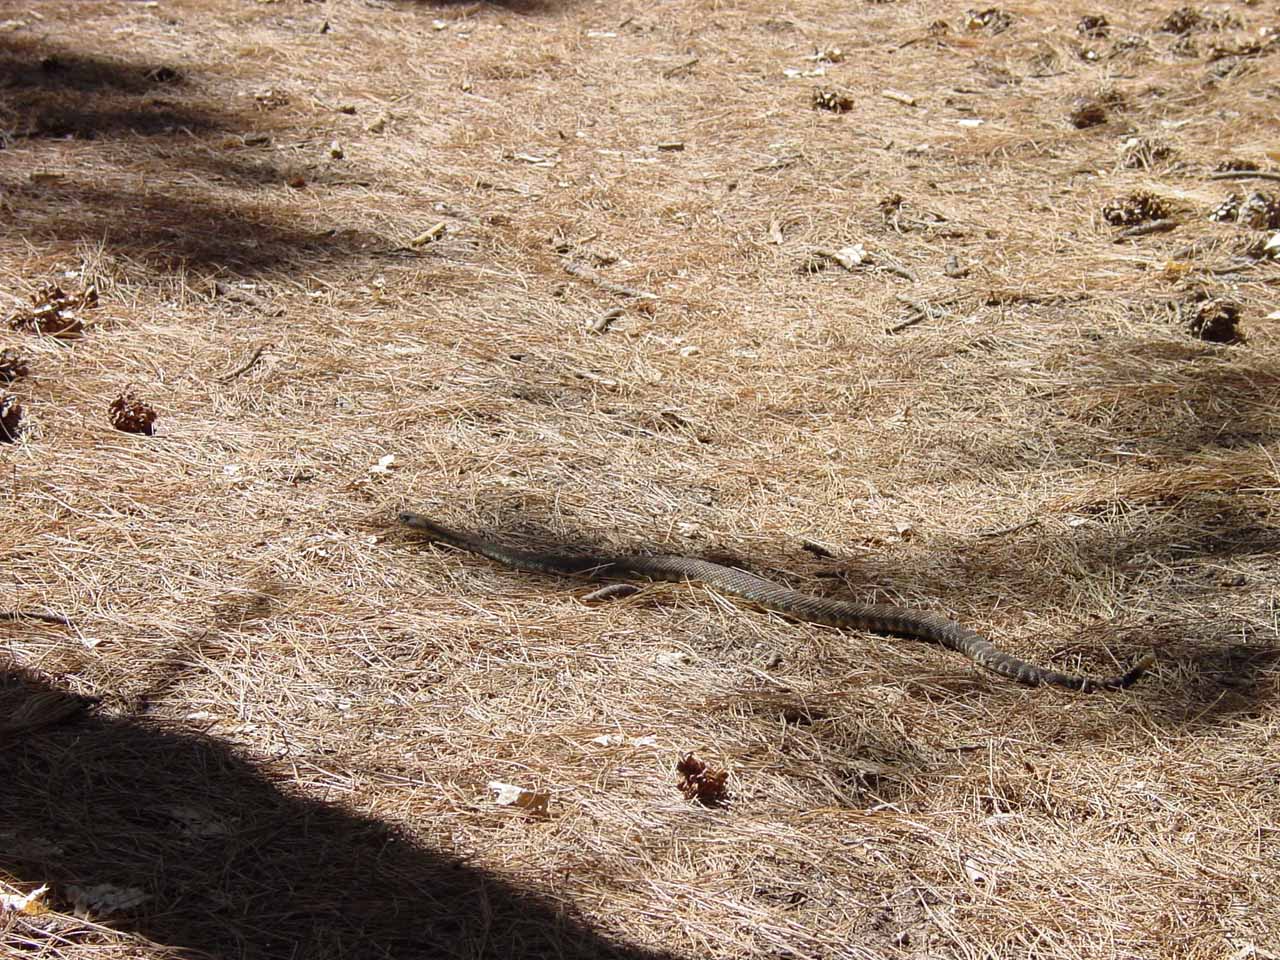 A rattlesnake slithering across the trail while I was hiking in the Yosemite backcountry